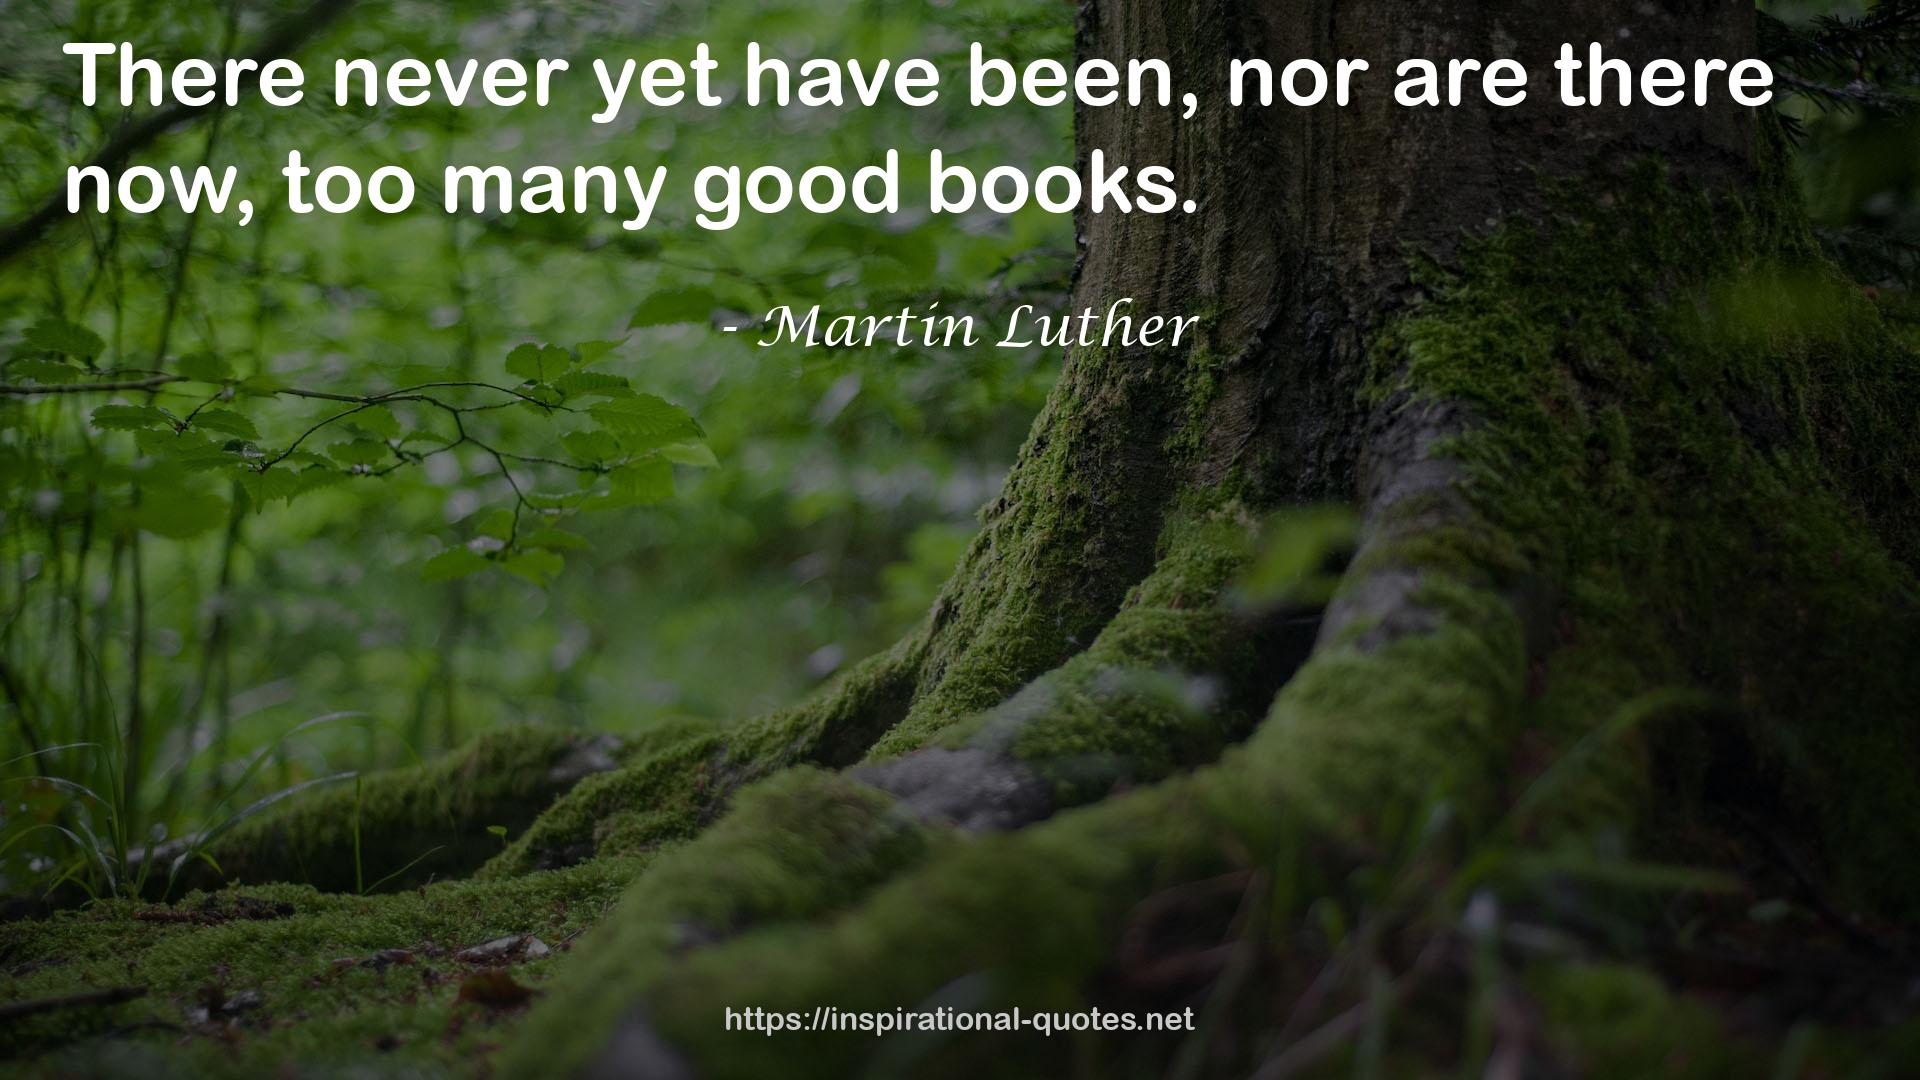 too many good books  QUOTES